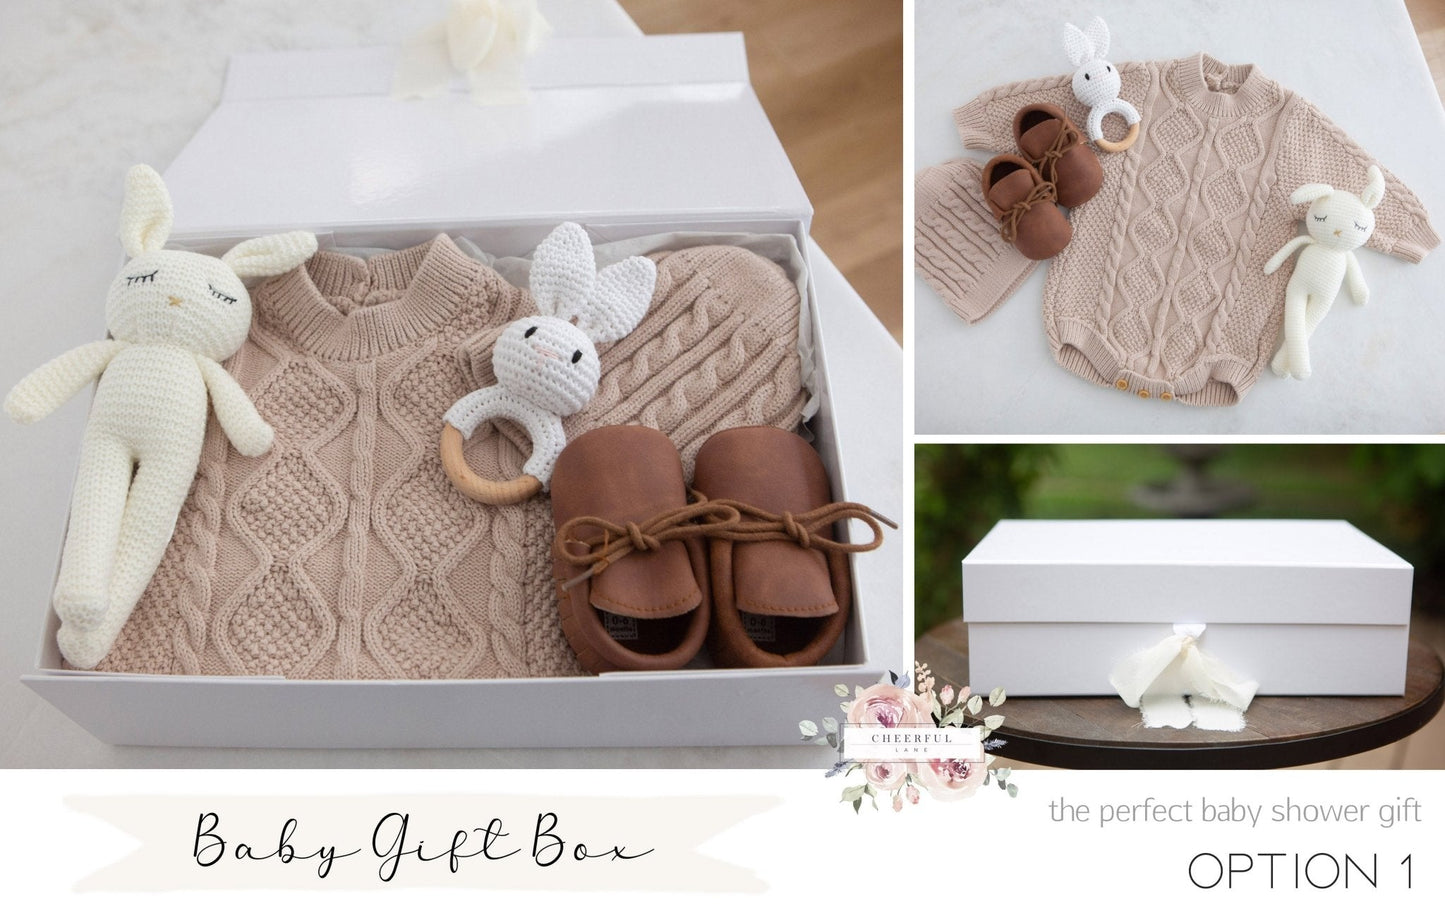 Baby Gift Box Set for girl - includes personalized gift tag - Cheerful Lane